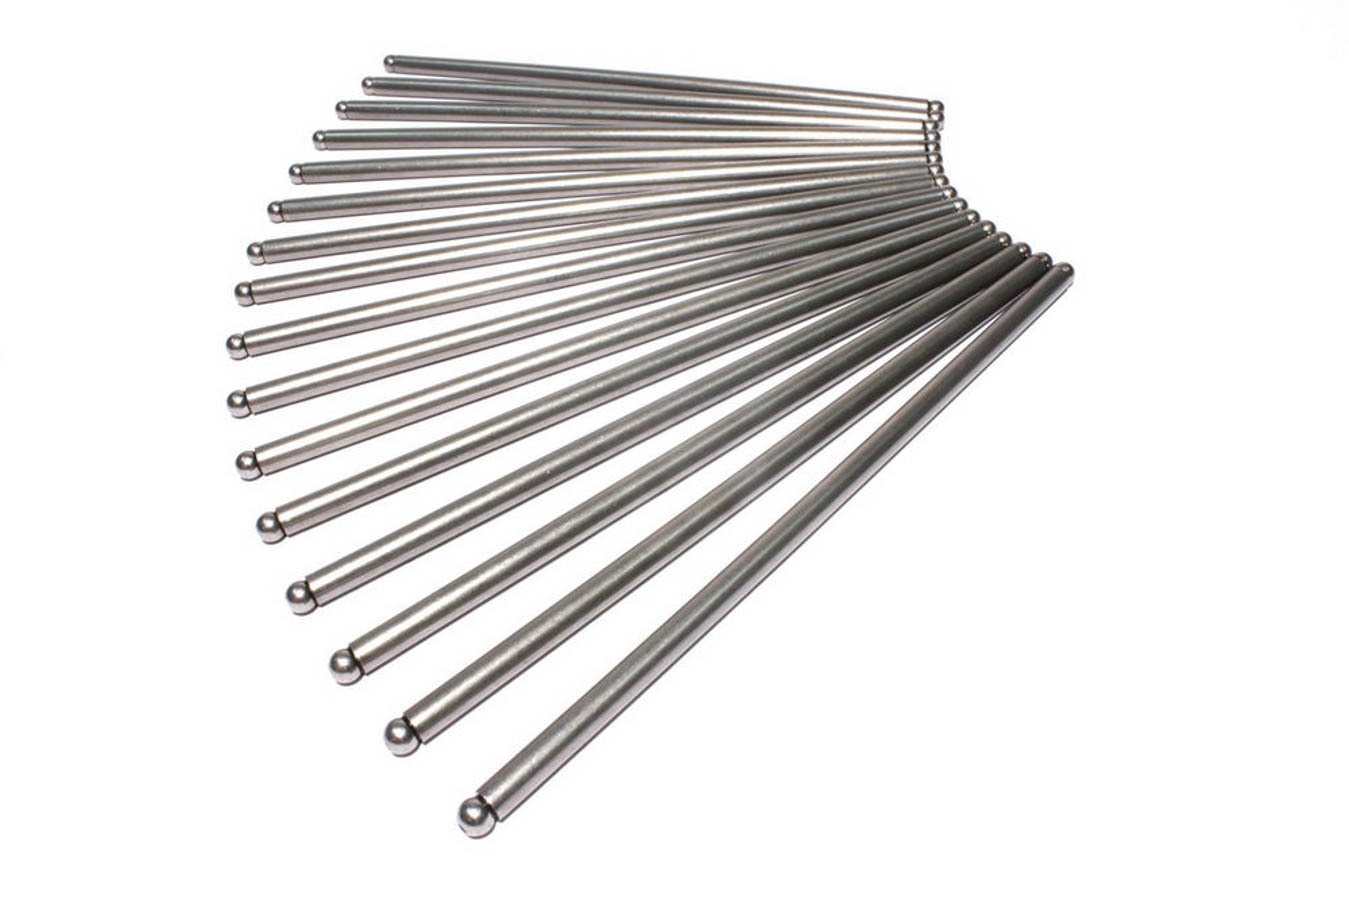 Comp Cams 7861-16 Pushrod, High Energy, 9.677 in Long, 5/16 in OD, Steel, Universal, Set of 16